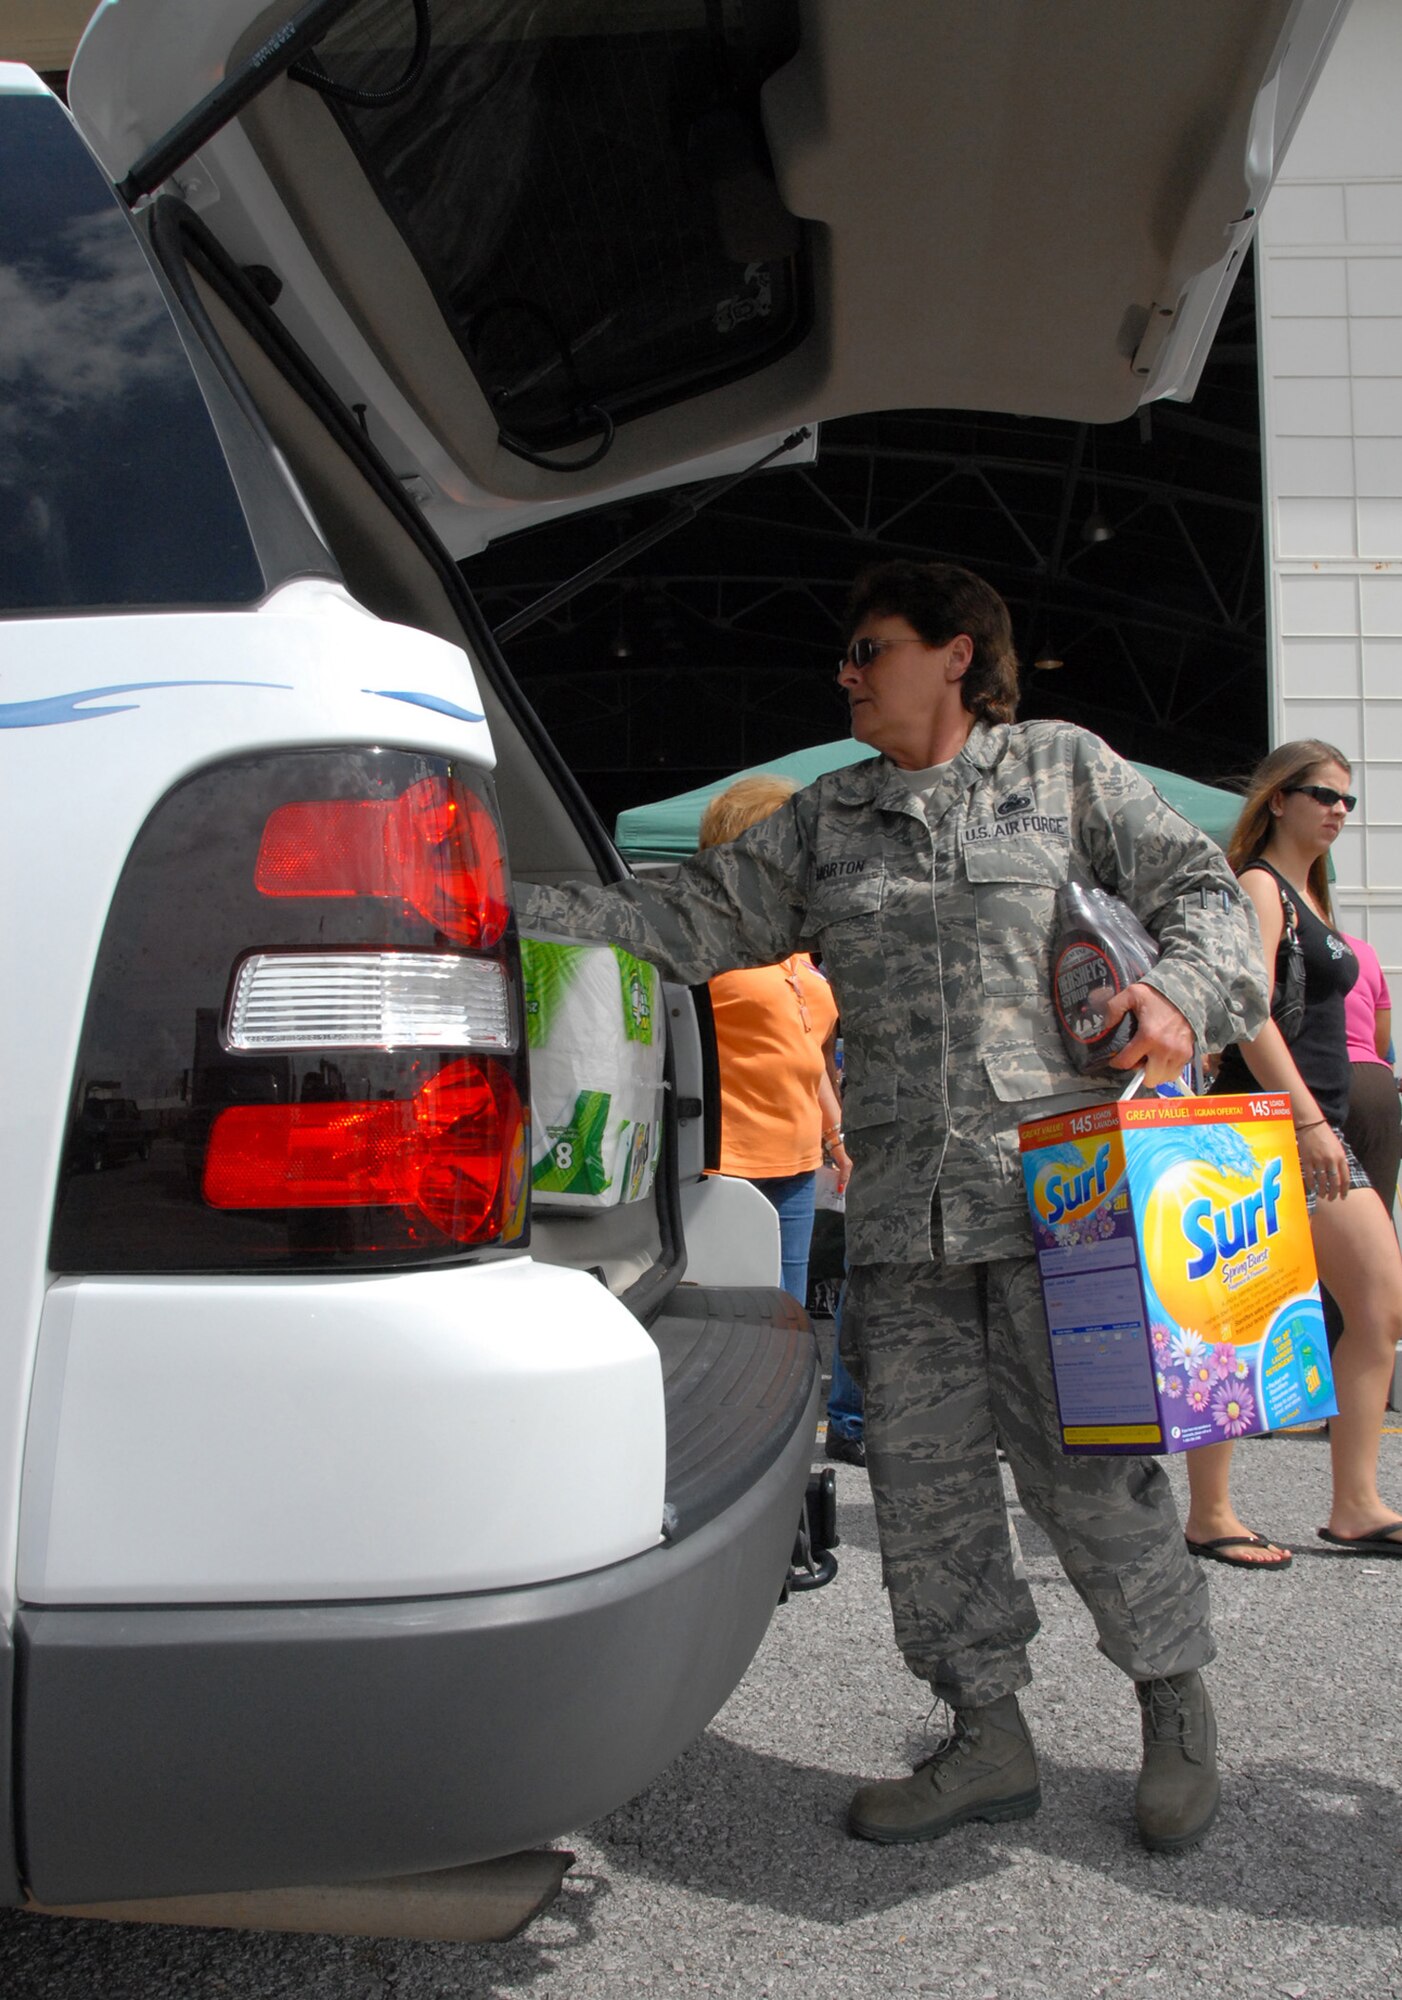 Senior Master Sgt. Theresa Morton, 919th Logistics Readiness Squadron, helps customers load up their cars after checking out at the case lot sale at Duke Field May 2.  People began lining up early, braved the heat of the day, and long wait to get the deals available from the sale.  U.S. Air Force photo/Staff Sgt. Samuel King Jr.